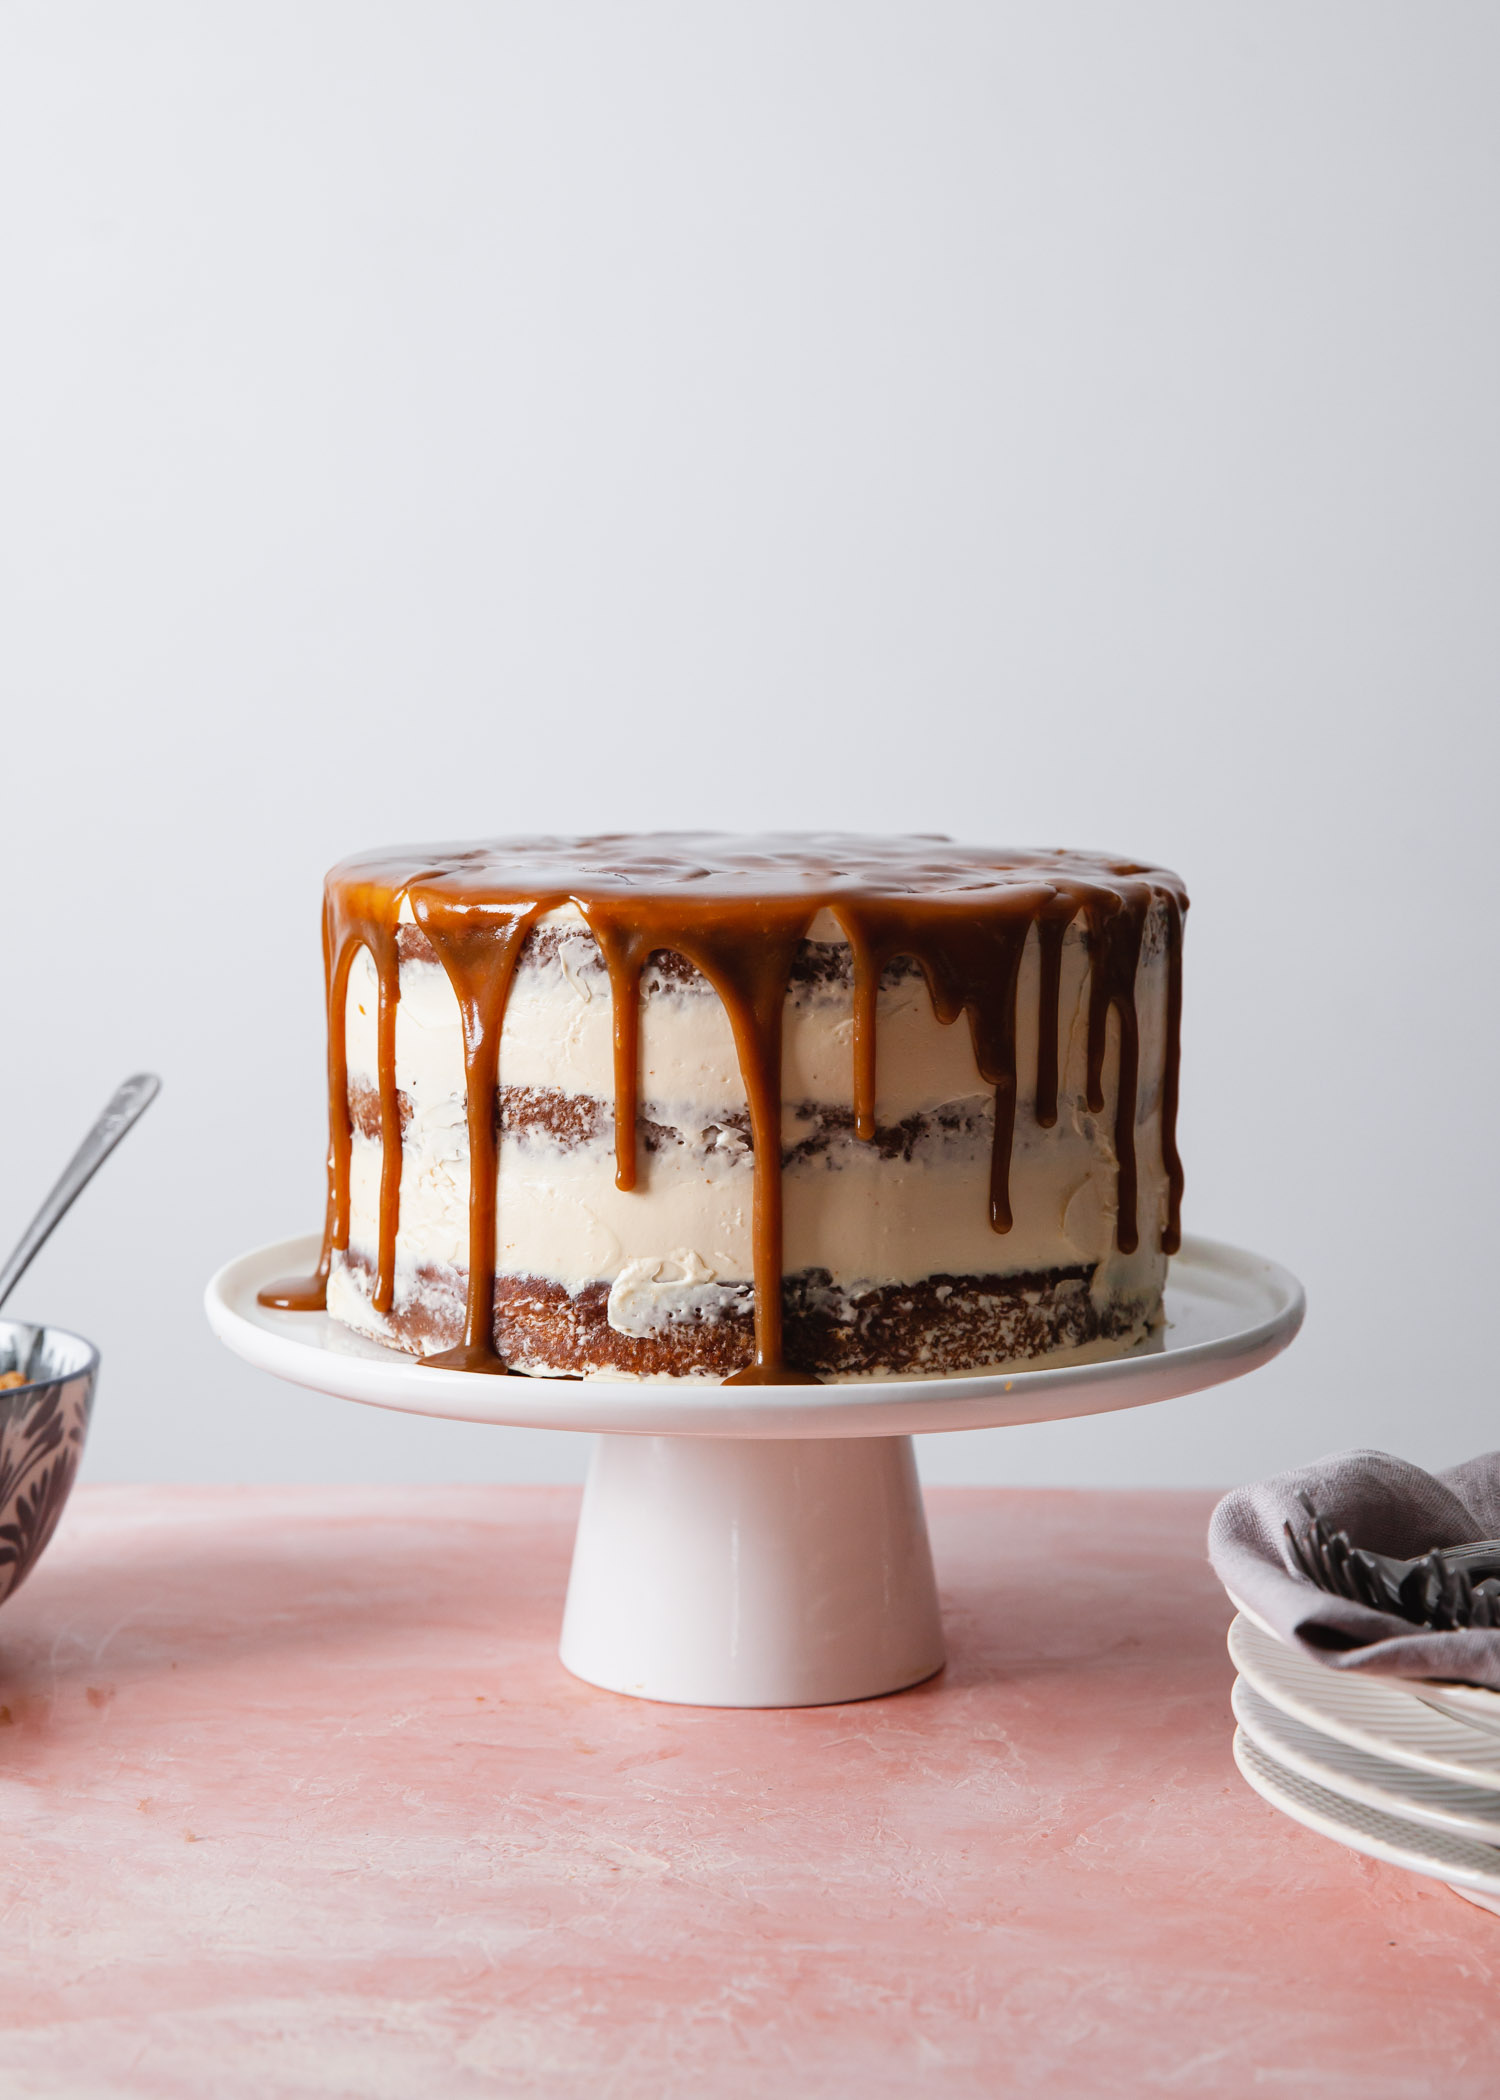 A sticky toffee pudding cake with caramelized white chocolate buttercream and toffee sauce